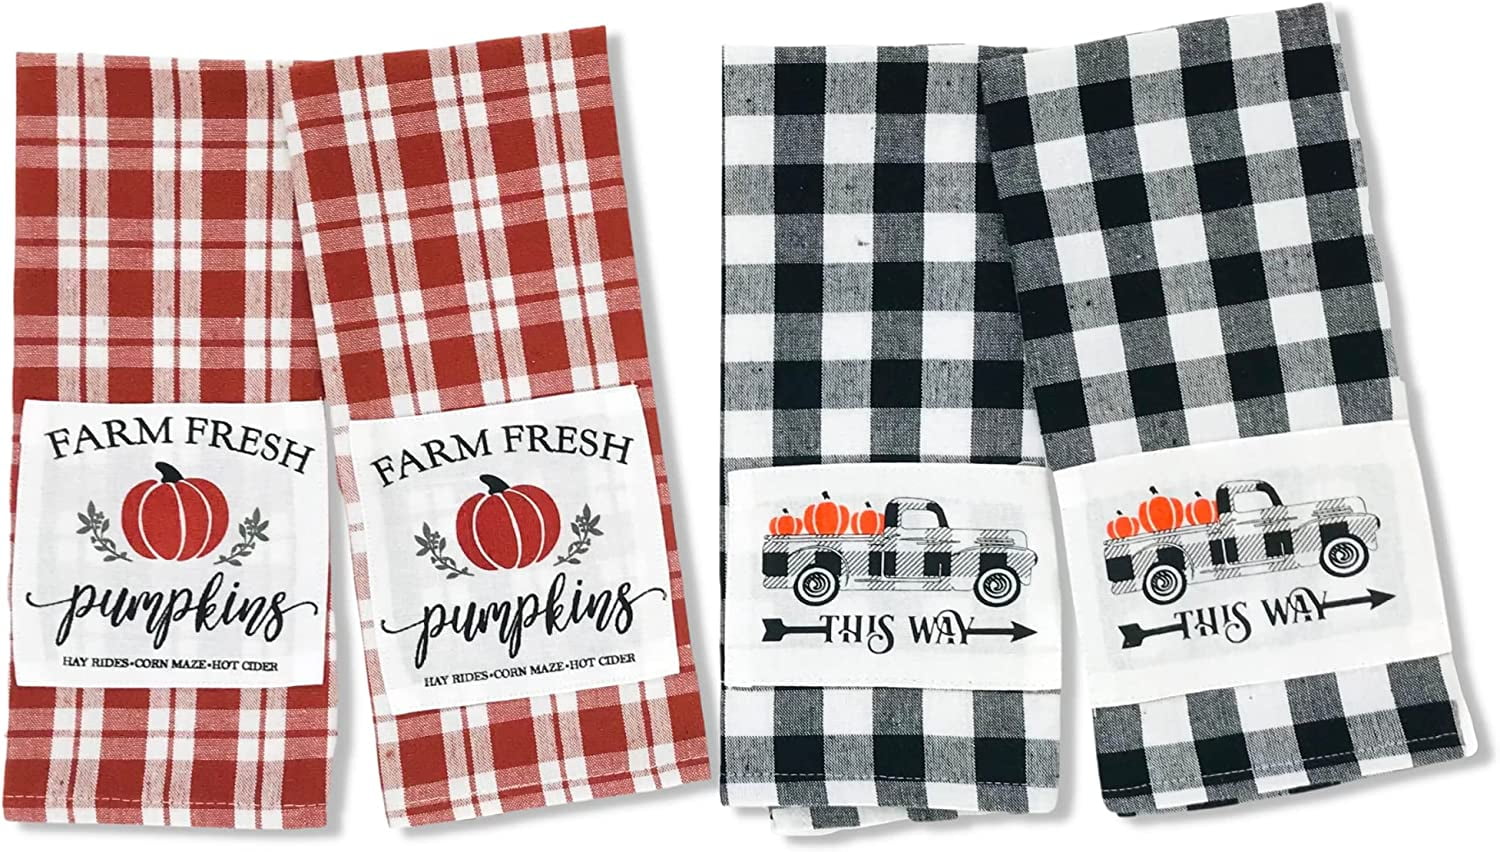 Buffalo Plaid Kitchen Towel Set - 4 Pack 20 x 30 Inch Heavy Duty Dish  Towels - Pink and White Oversized Buffalo Check Towels with Hanging Loops -  100%